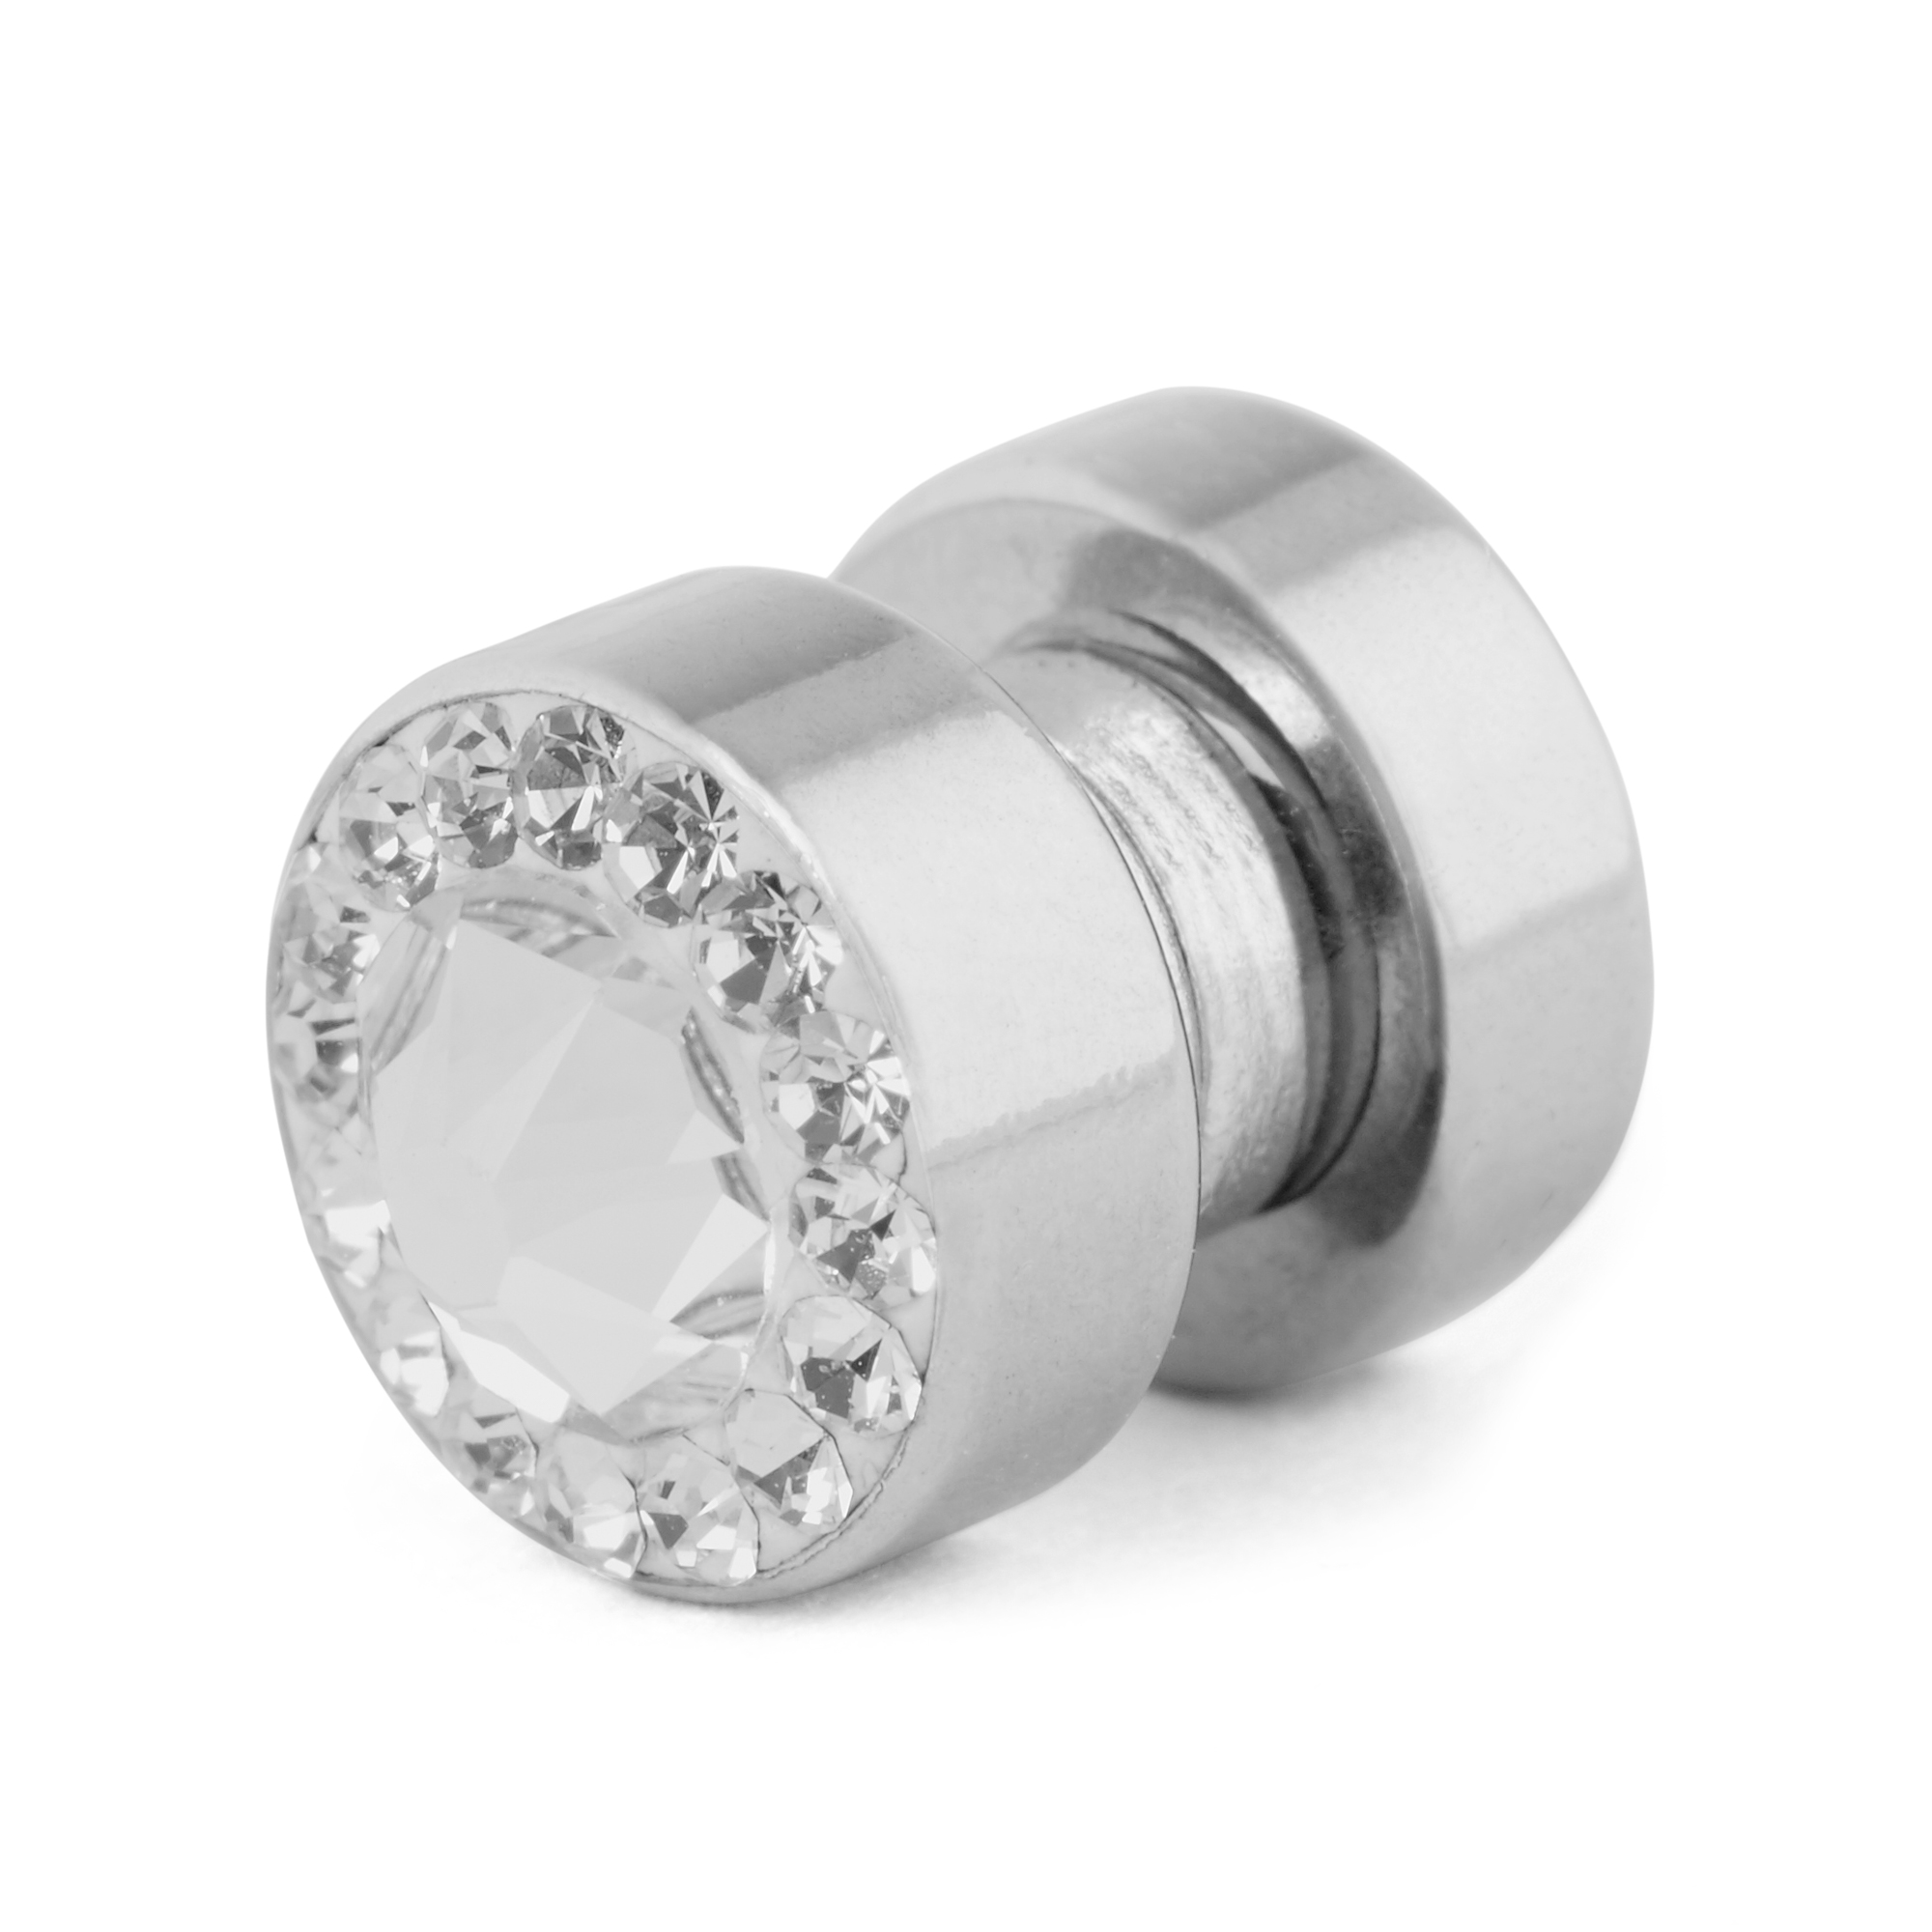 Men's Silver Plated 6mm Magnetic Clip On Earrings Created with Zircondia®  Crystals by Philip Jones